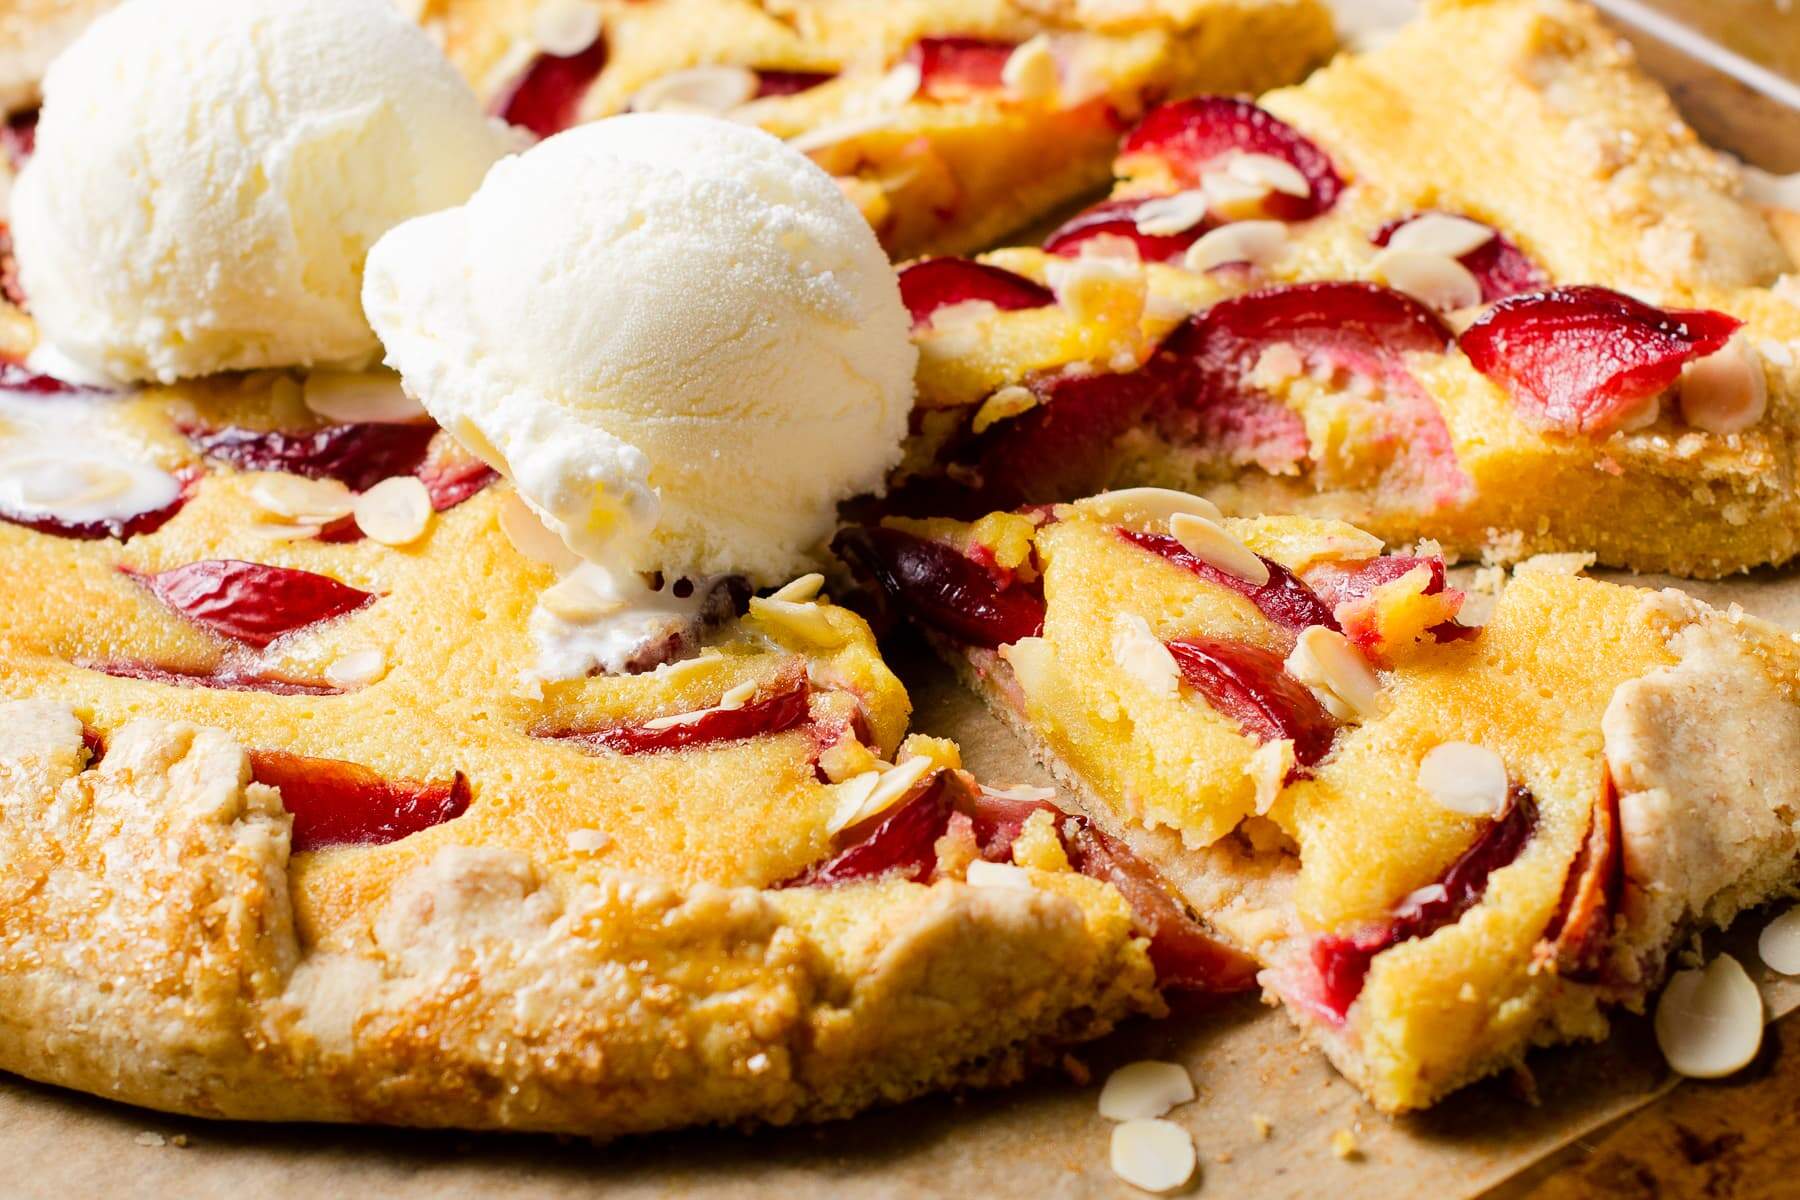 A plum and almond galette tart with 2 scoops of vanilla ice cream